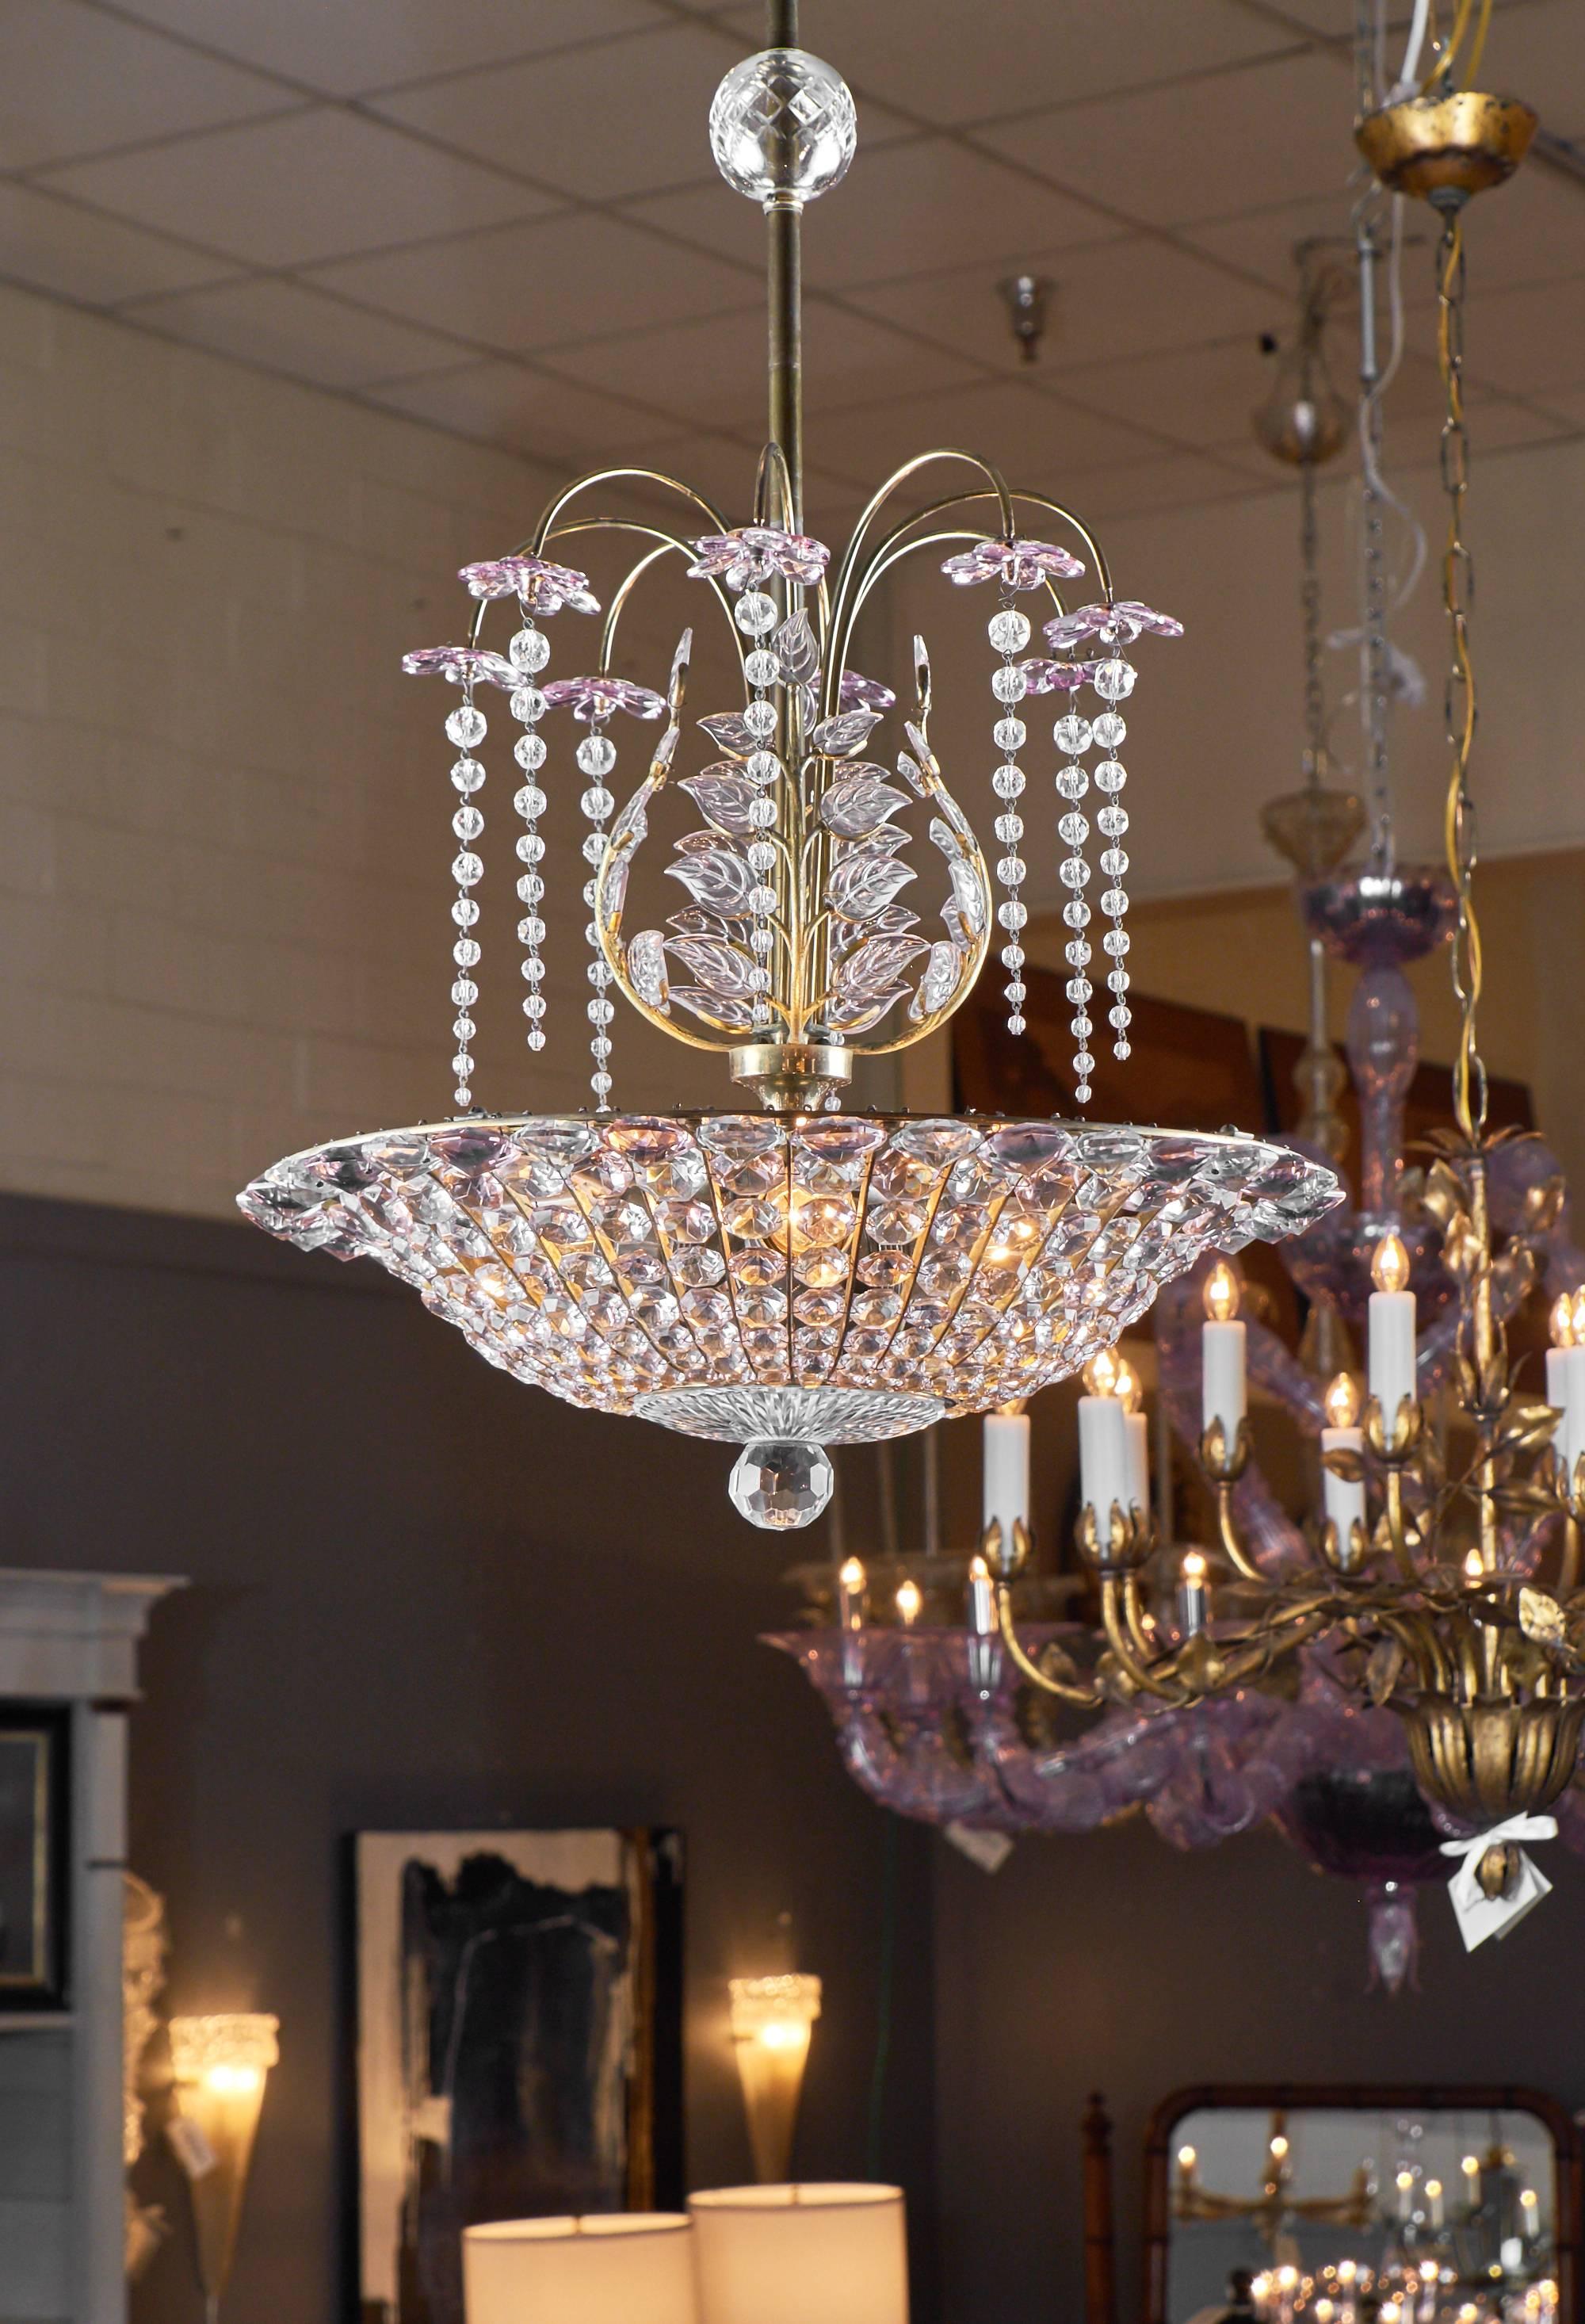 French crystal chandelier attributed to Maison Baguès. This beautiful piece features hanging strings of crystals in the style of wisteria branches and in it's center the crystal leaves iconic to Maison Baguès. The amethyst color and the stylized